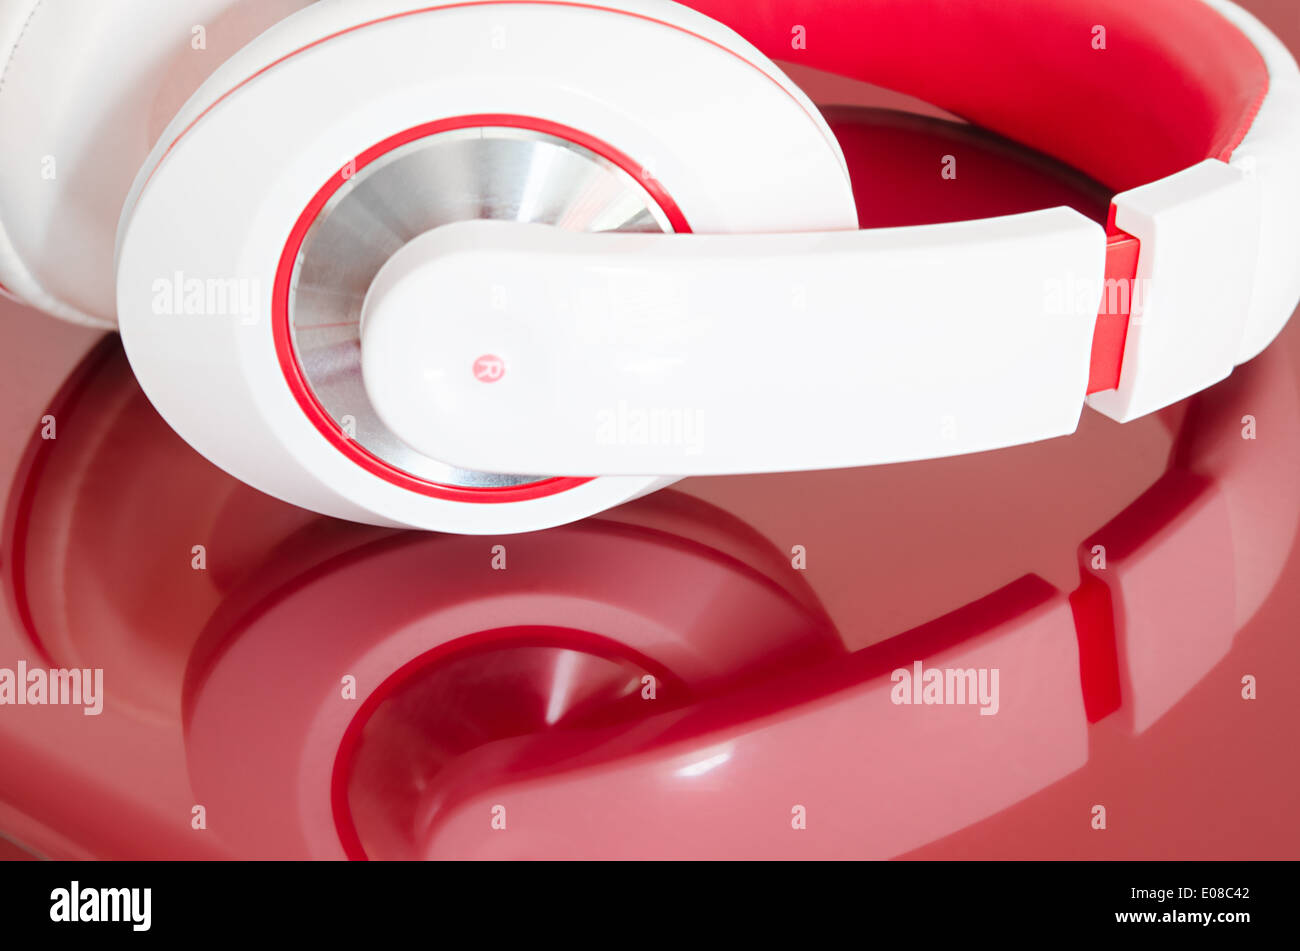 Red and white colorful headphones on bordo laptop mirrored surface Stock Photo